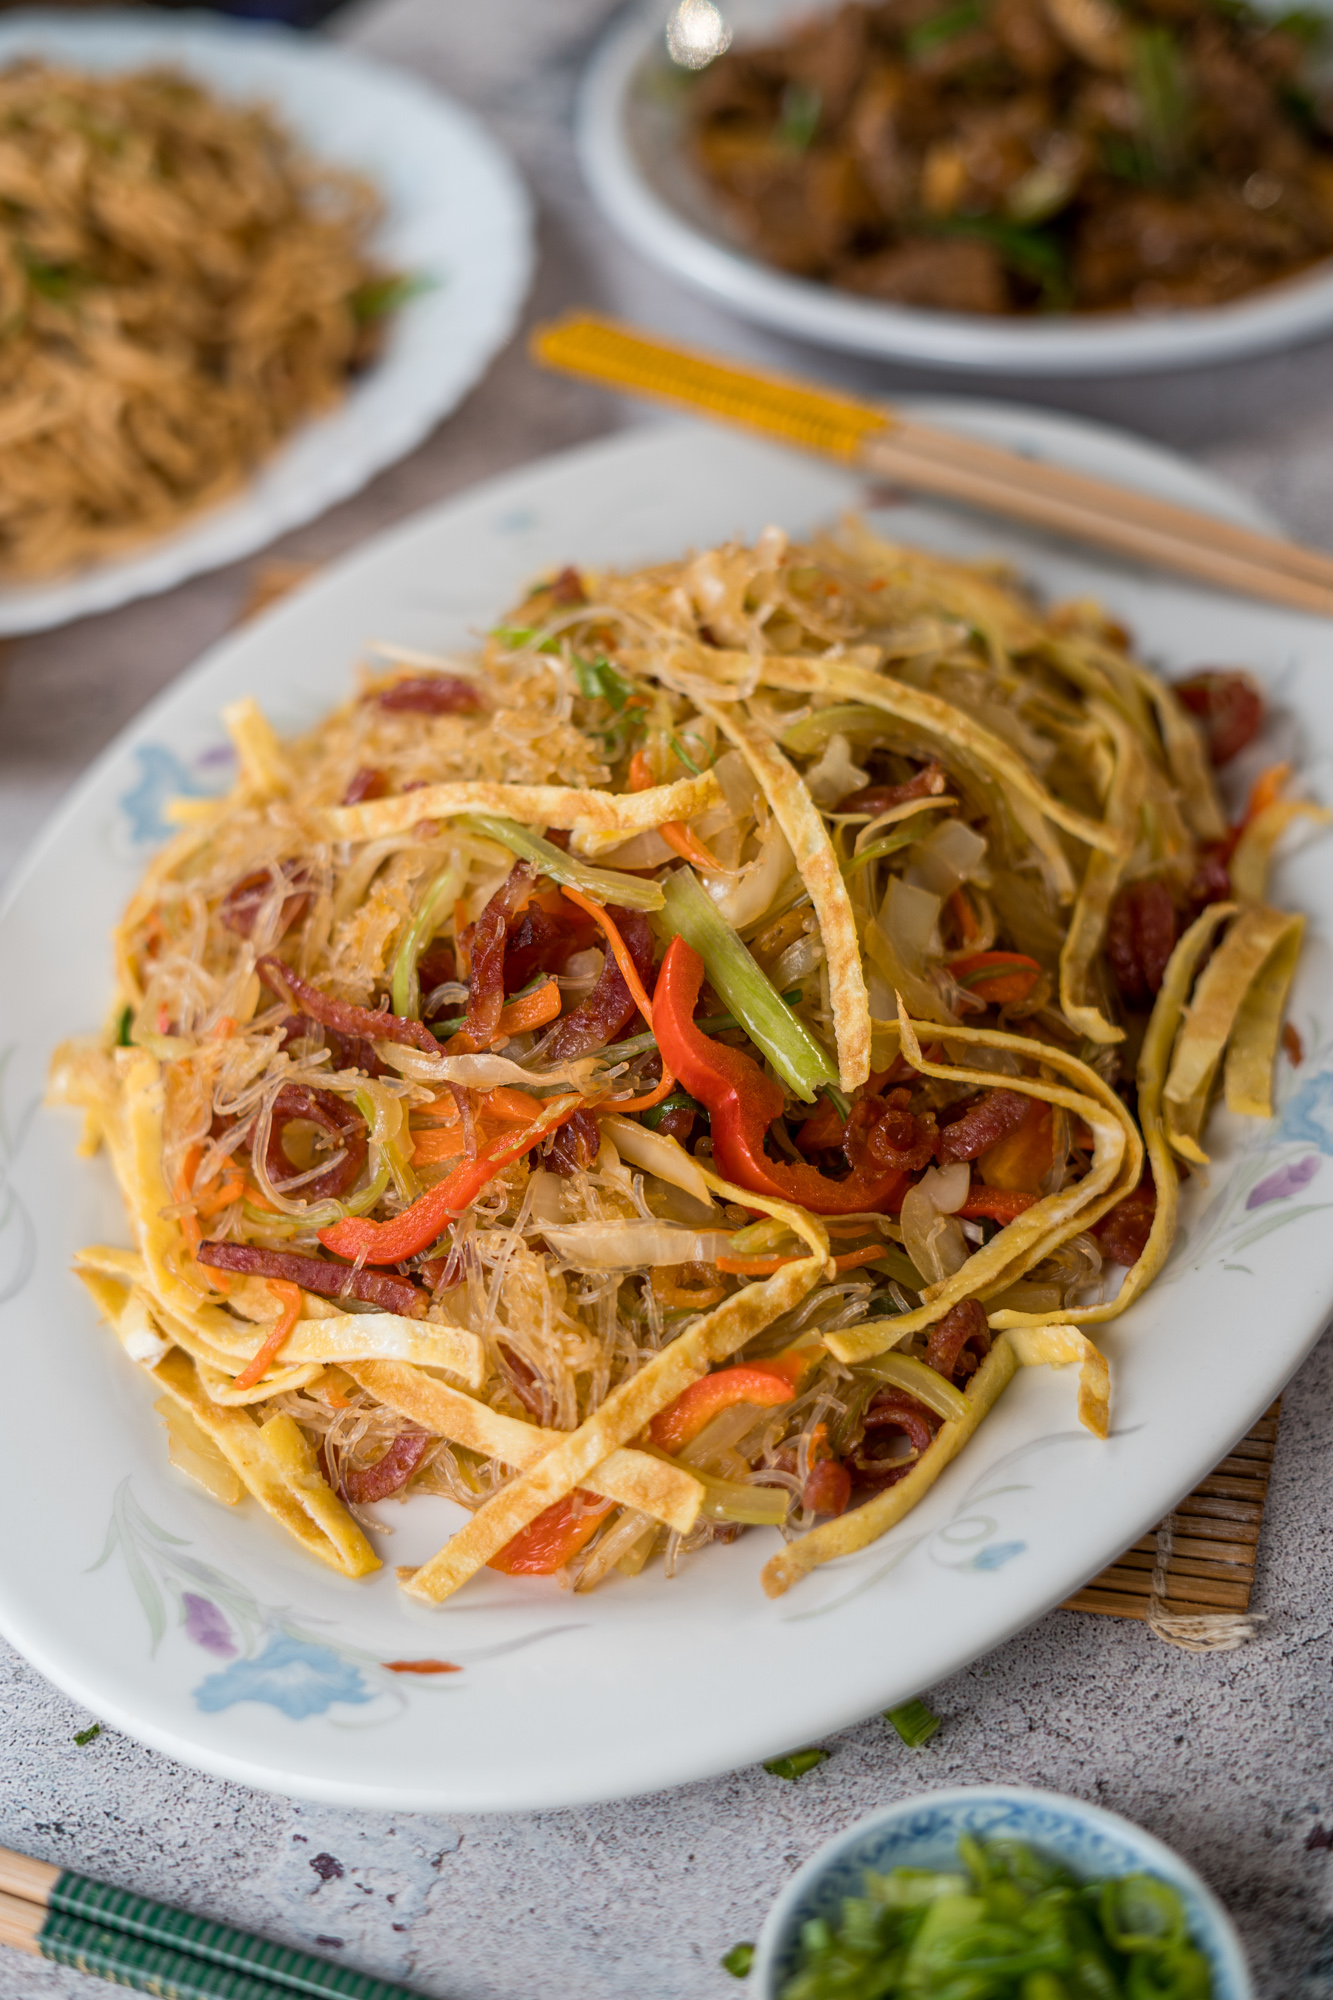 This delicious Home-Style Stir Fried Rice Vermicelli is going to wok your world. Made up of slurp-worthy rice vermicelli, crunchy vegetables, and delicate ribbons of egg, this unique noodle dish makes the perfect side dish or meal on its own. Read on for the full recipe!